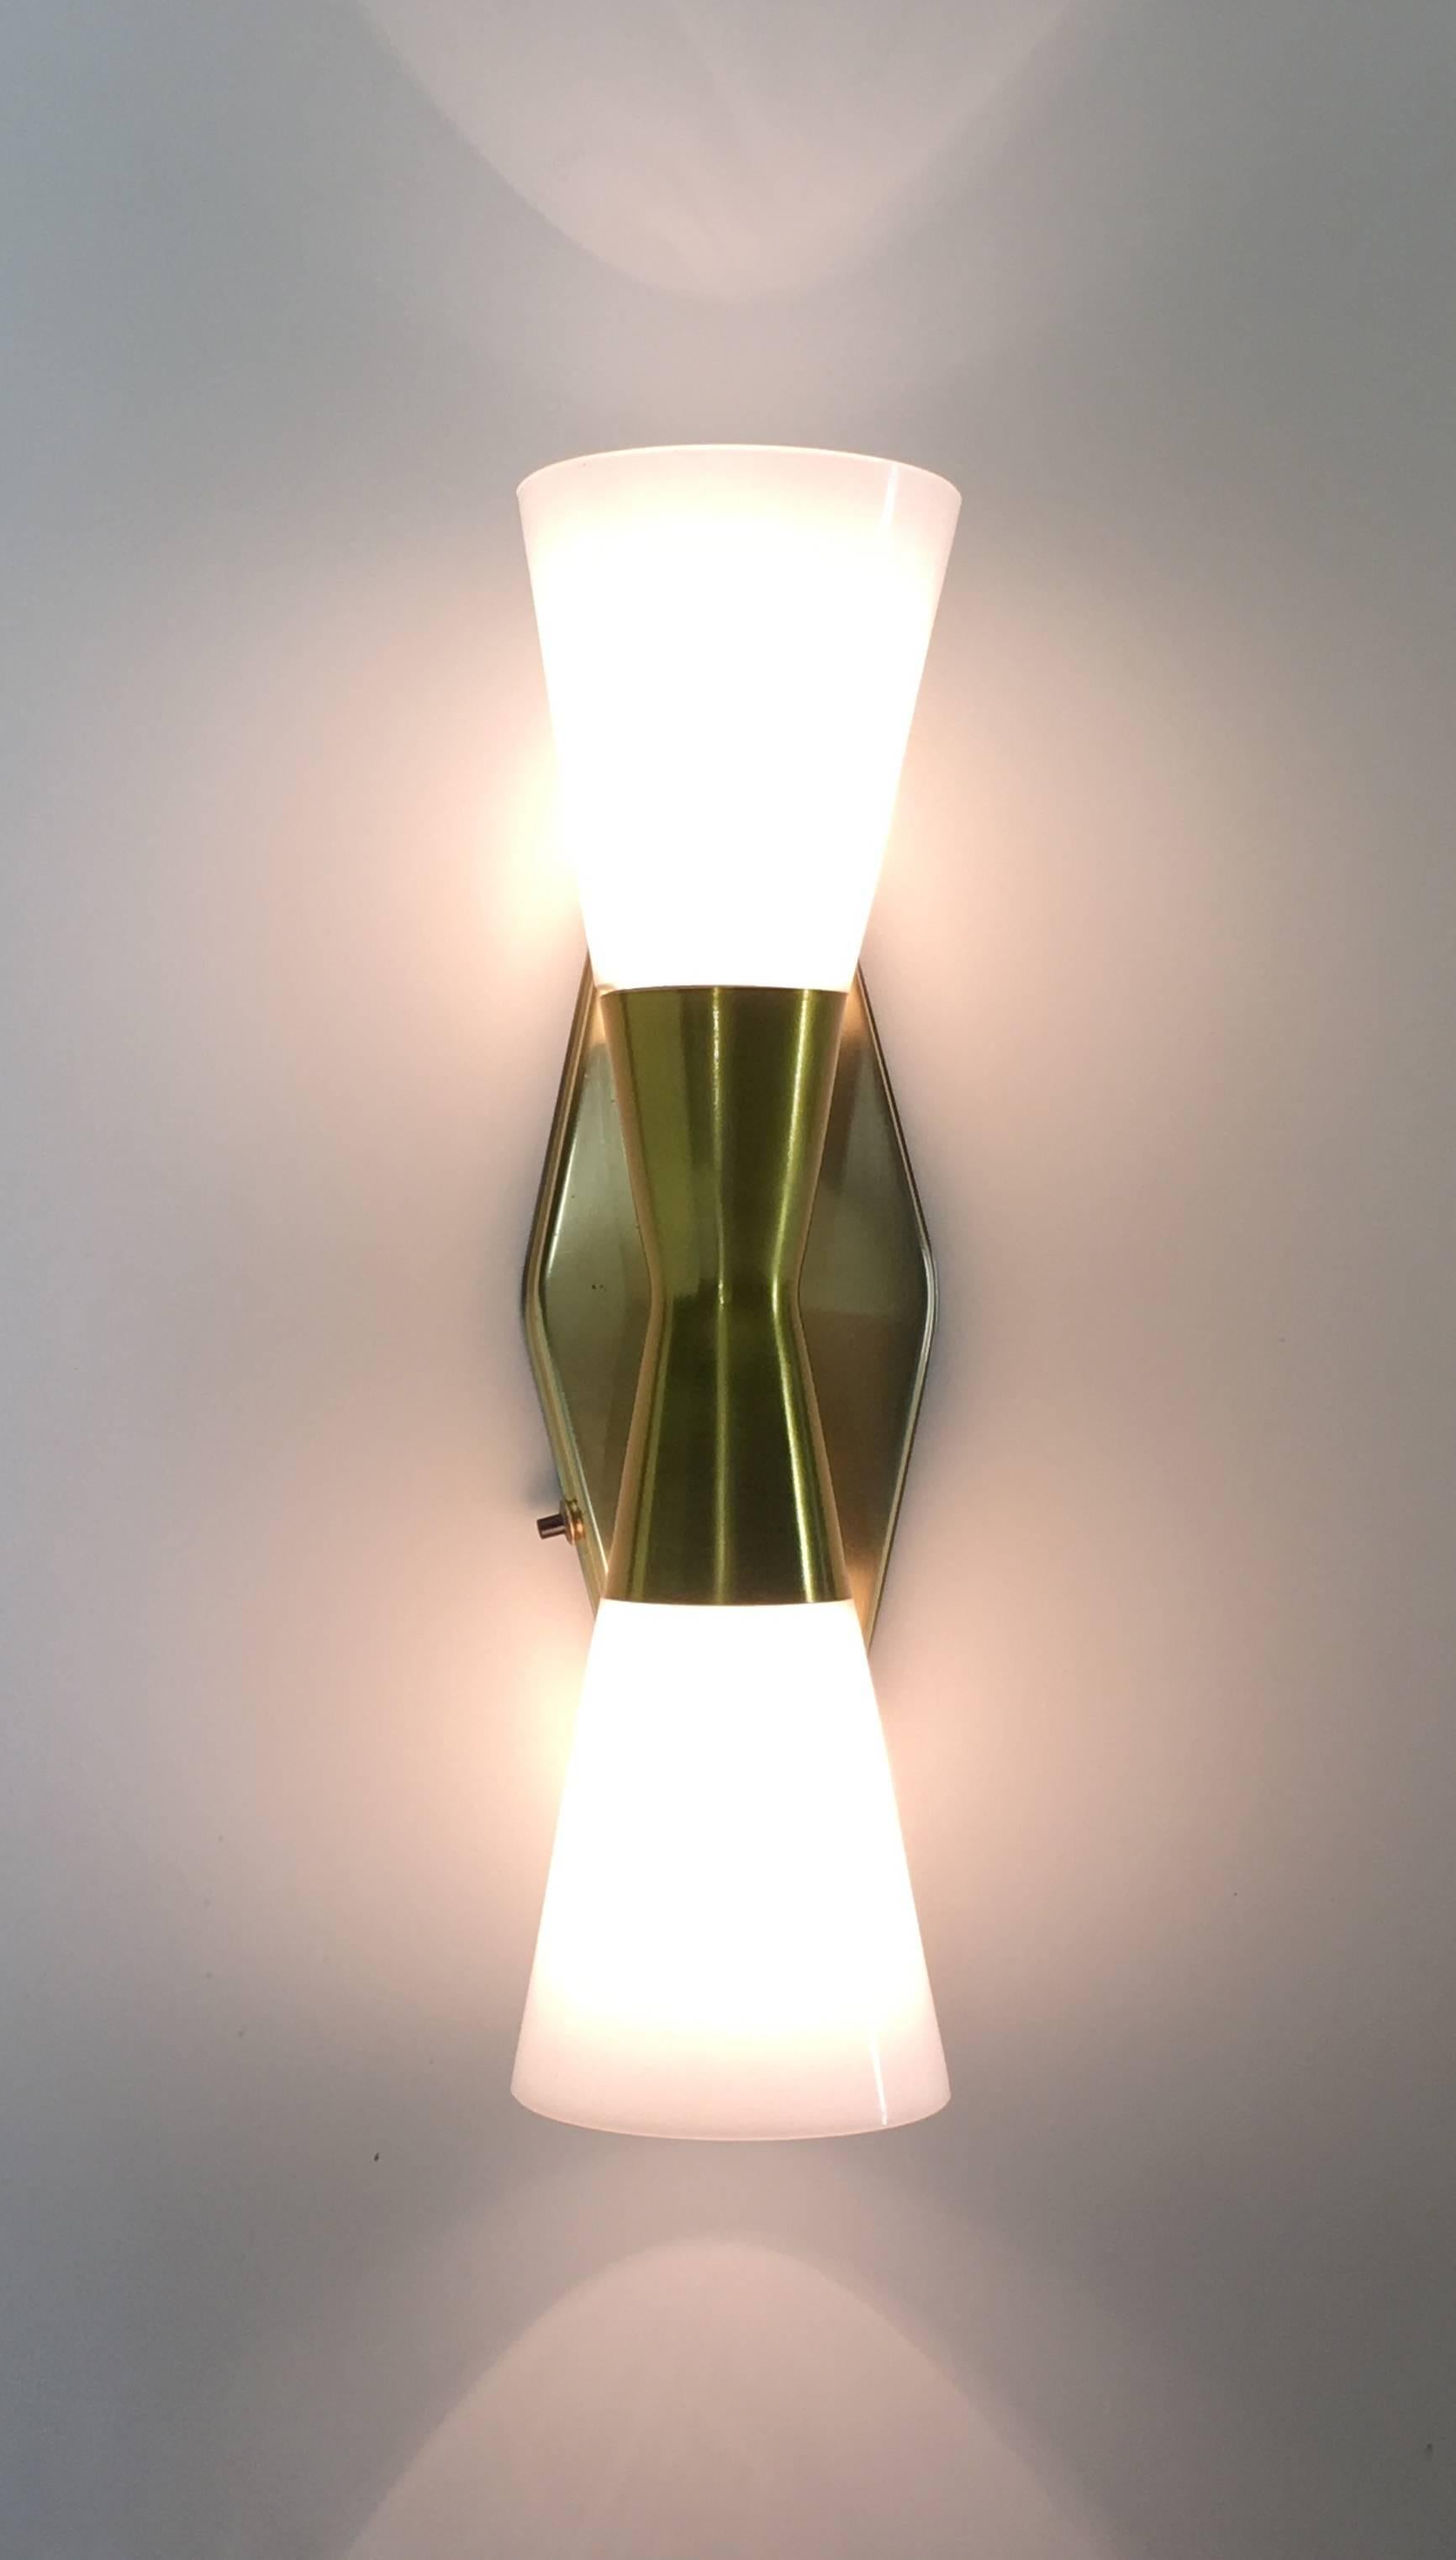 The bow tie sconce model V-6446 lamp produced by John C. Virden Lighting in the 1950s became iconic and has been reinvented many times, though none capture the style of the original design as well. The hour glass shape is taken from the atomic